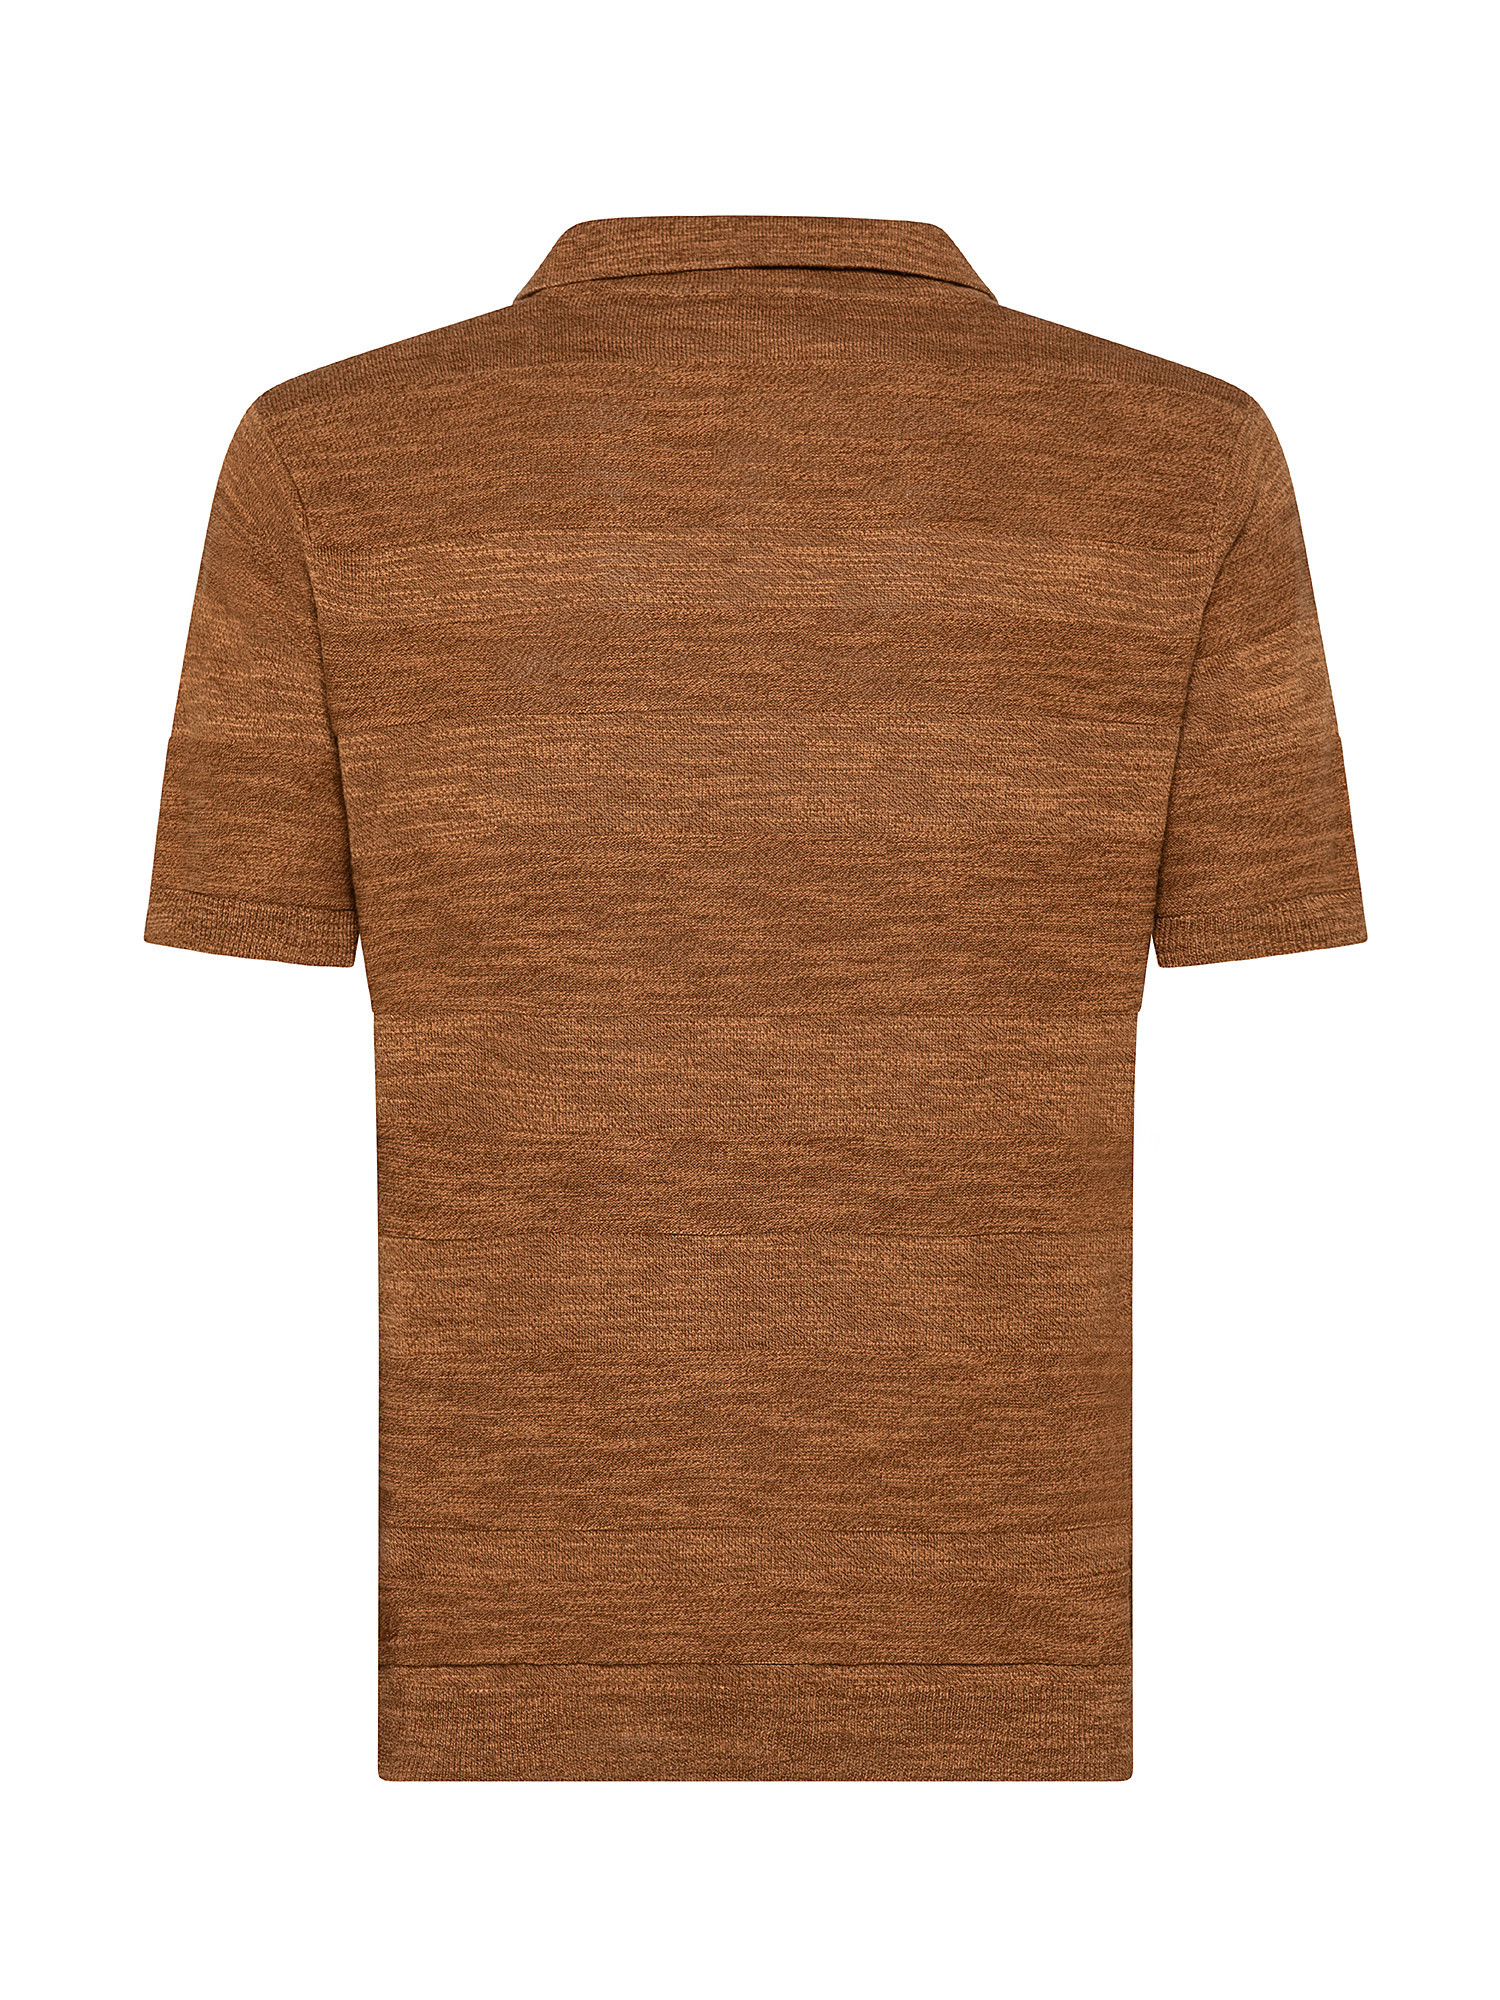 Cotton blend knitted polo shirt, Brown, large image number 1